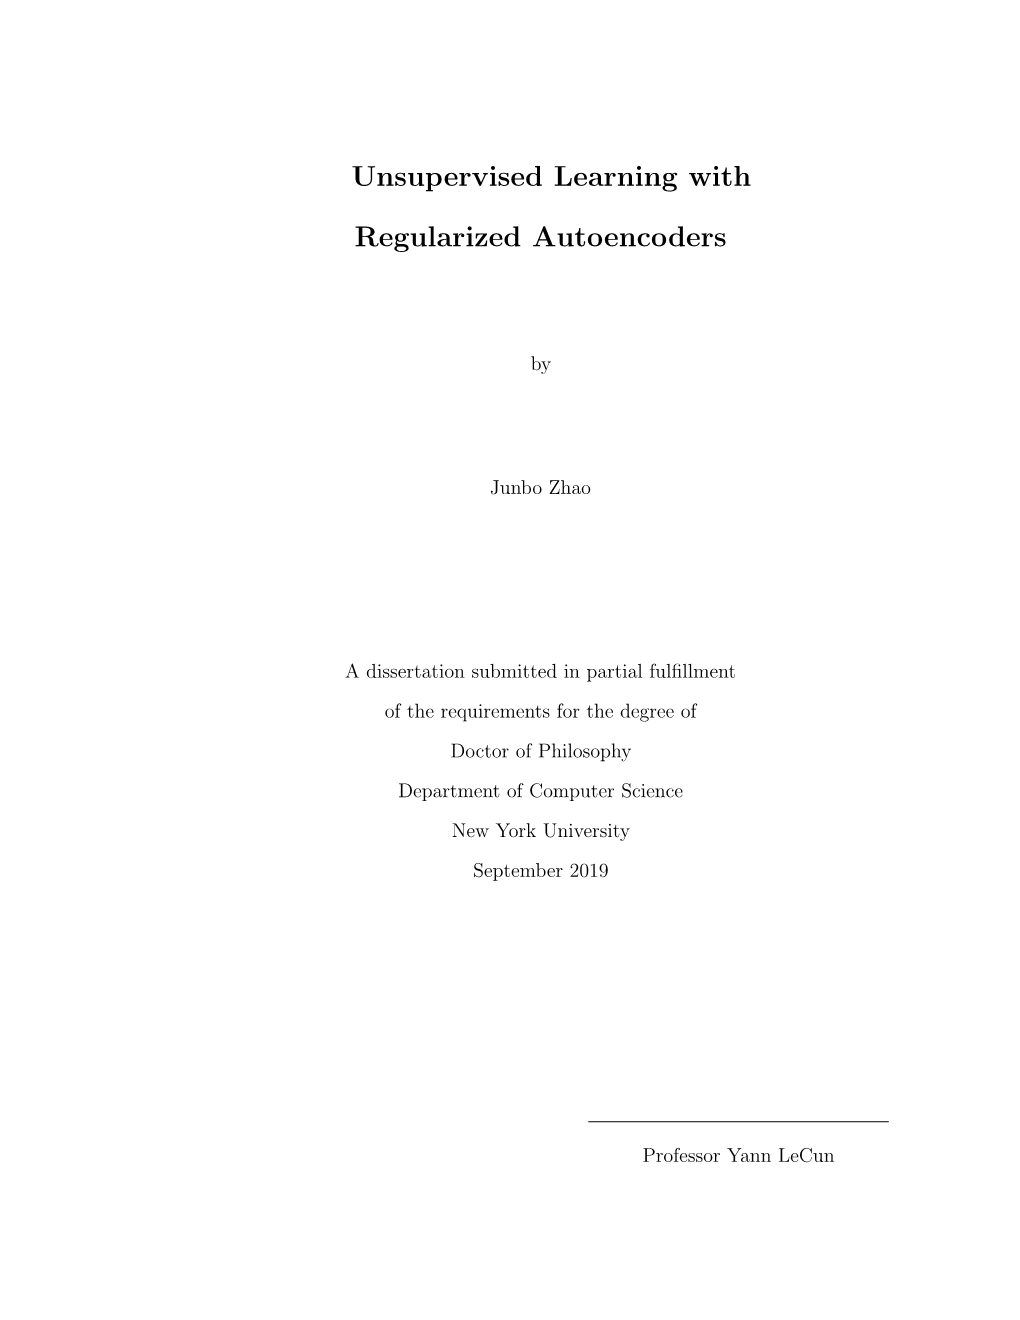 Unsupervised Learning with Regularized Autoencoders